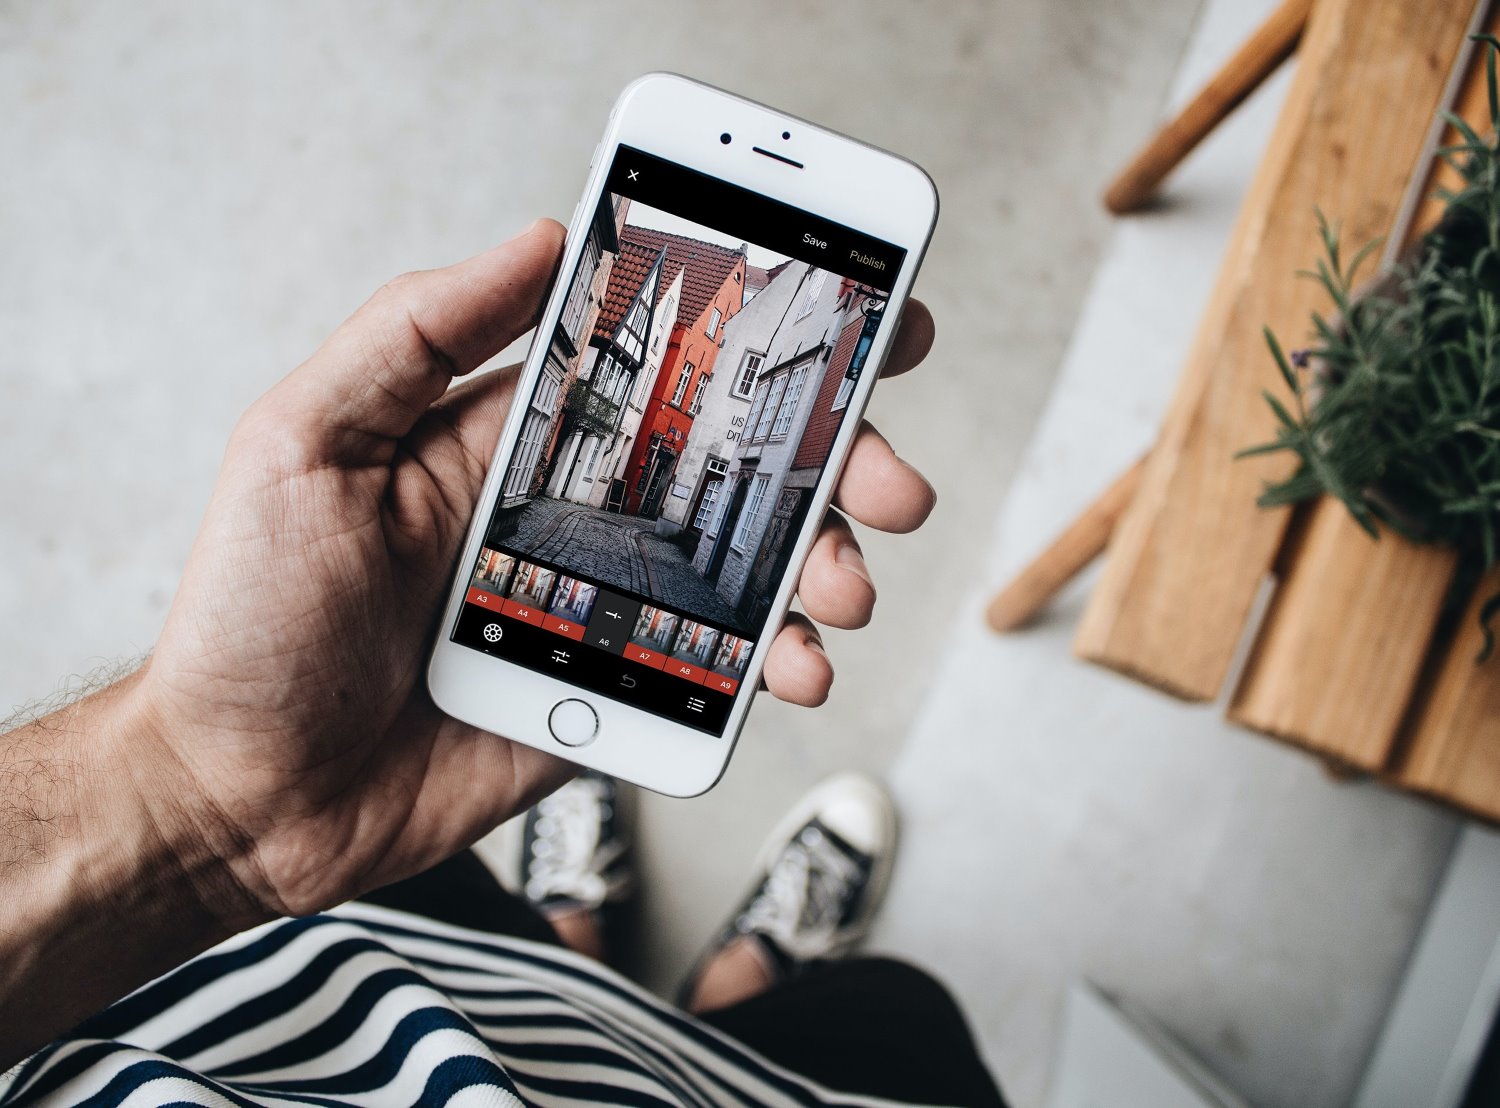 The best photo-editing apps